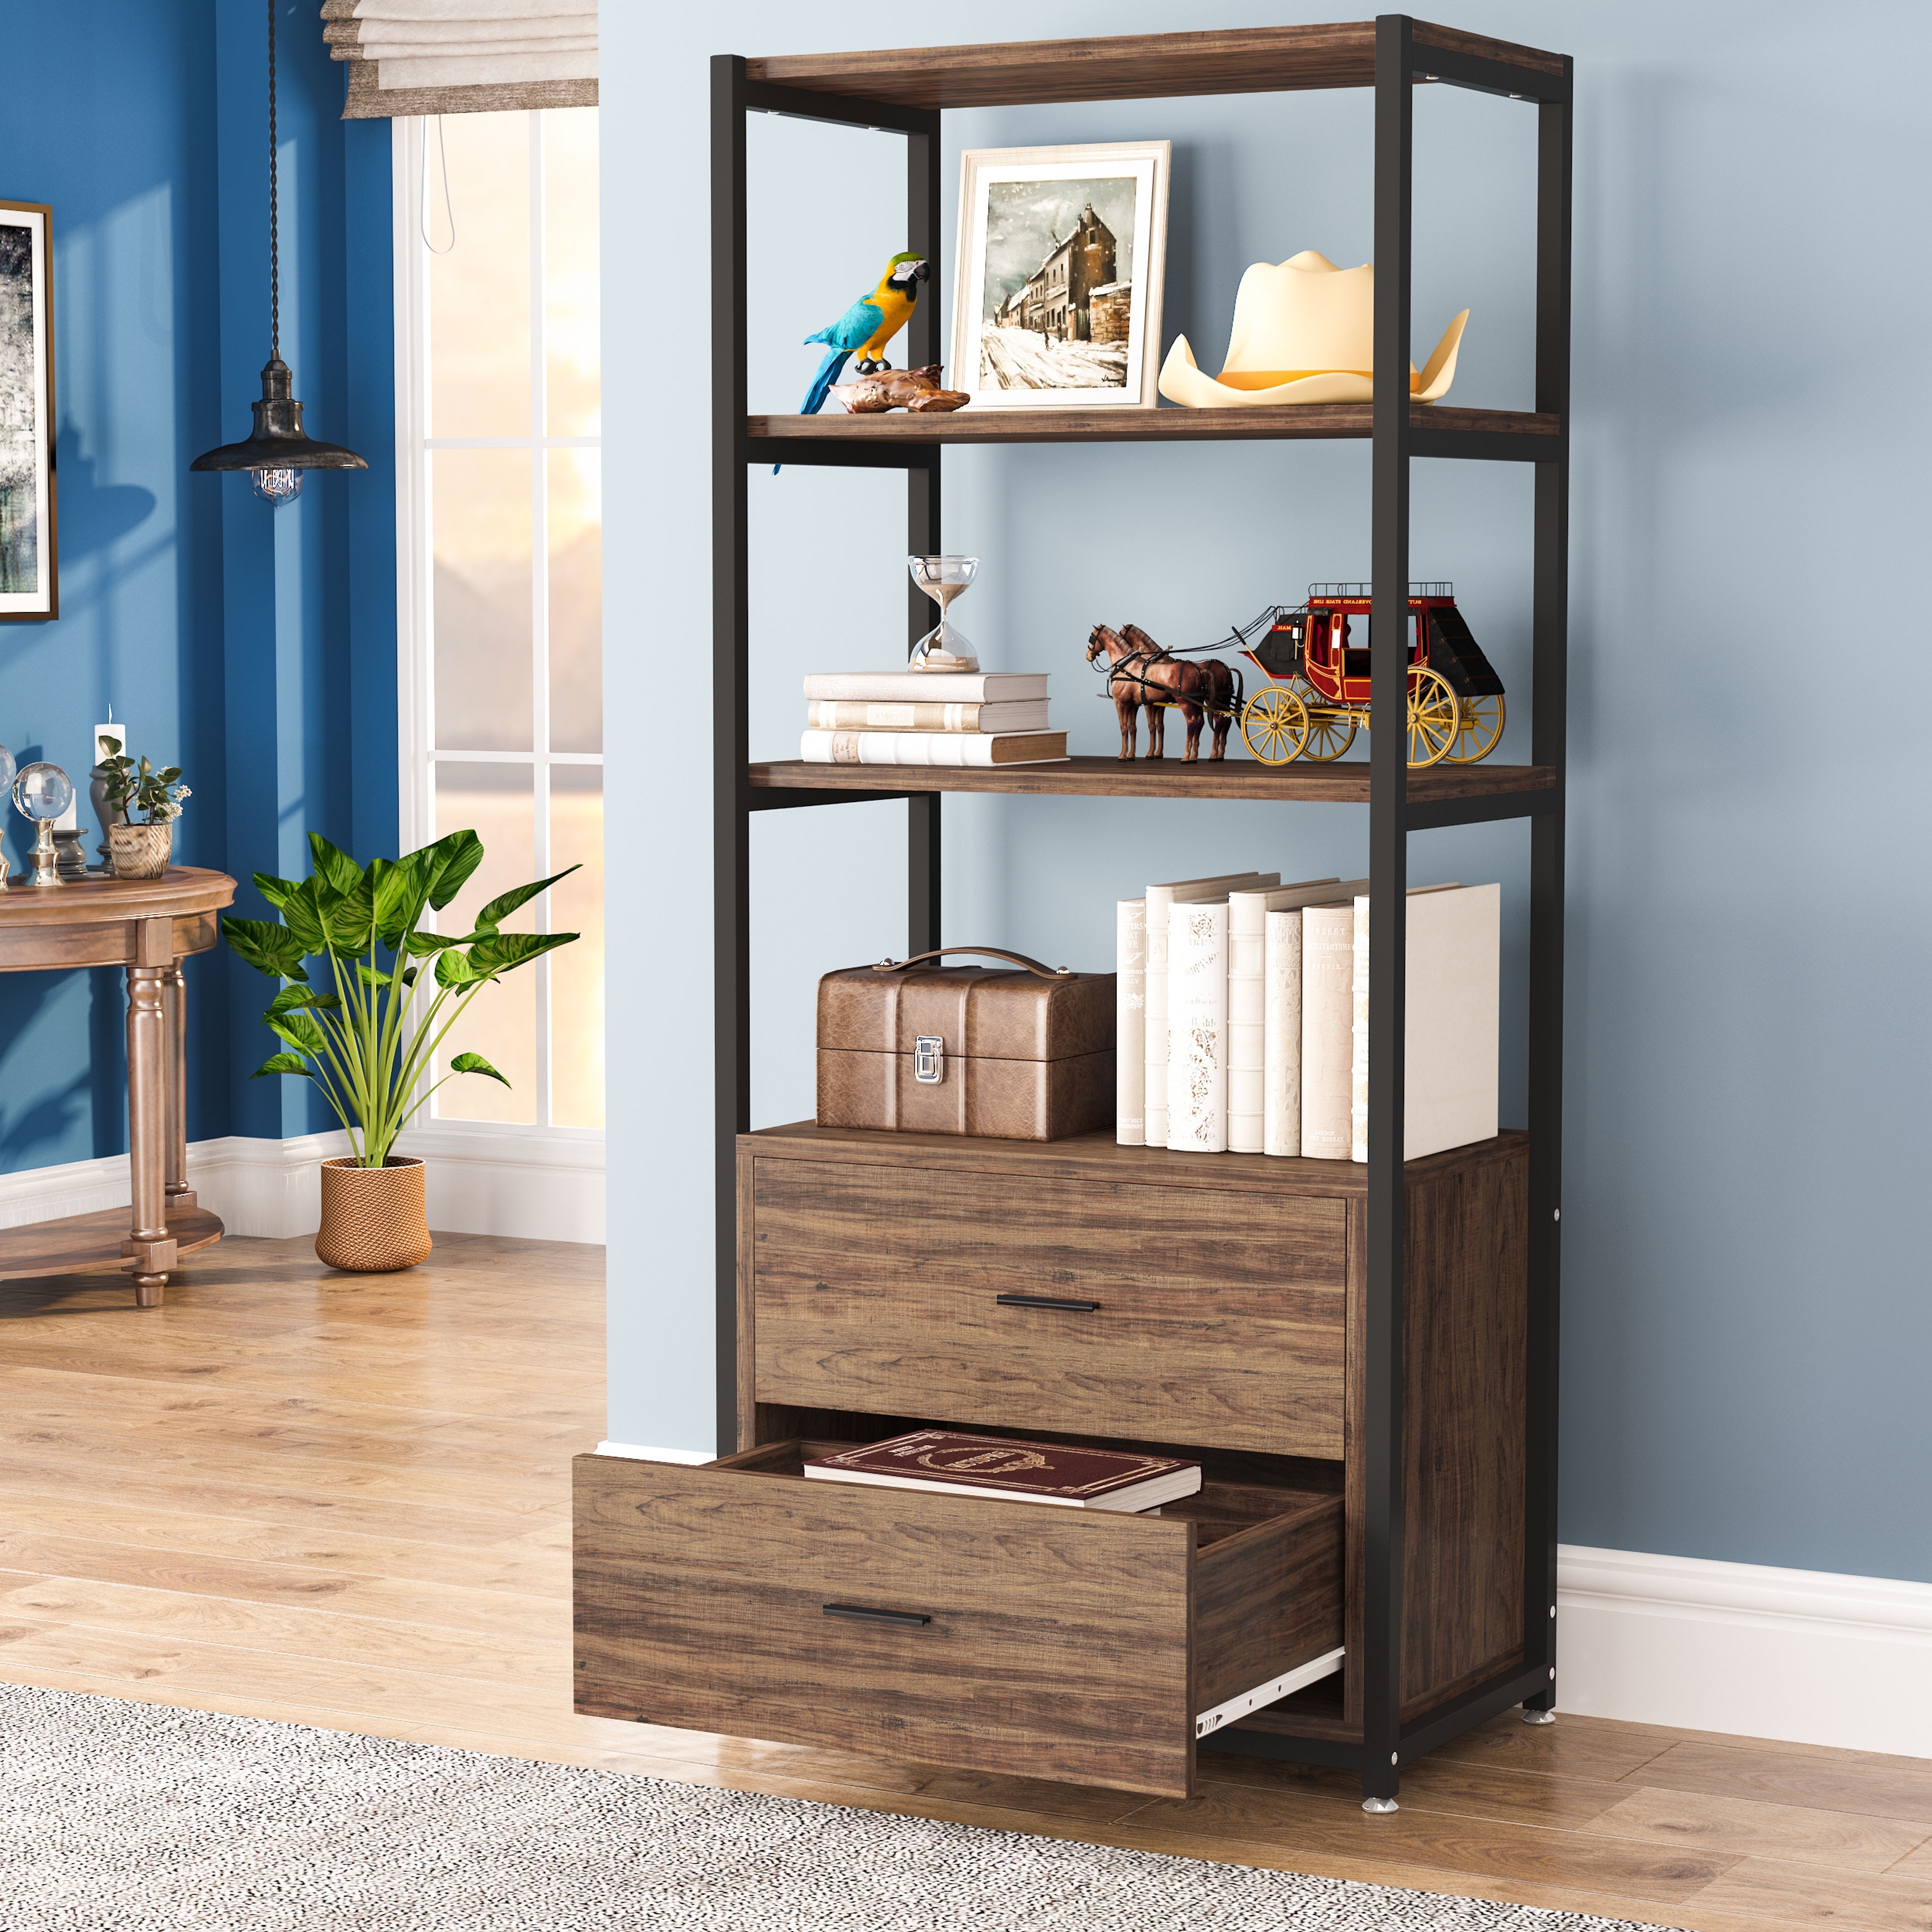 https://ak1.ostkcdn.com/images/products/is/images/direct/222e05983407ad7b4920dacec8c551bd9b89bbd6/Industrial-Bookshelf-with-Drawers-and-Matte-Steel-Frame%2C-5-Tier-Bookcase%2C-Display-Decorative-Shelf.jpg